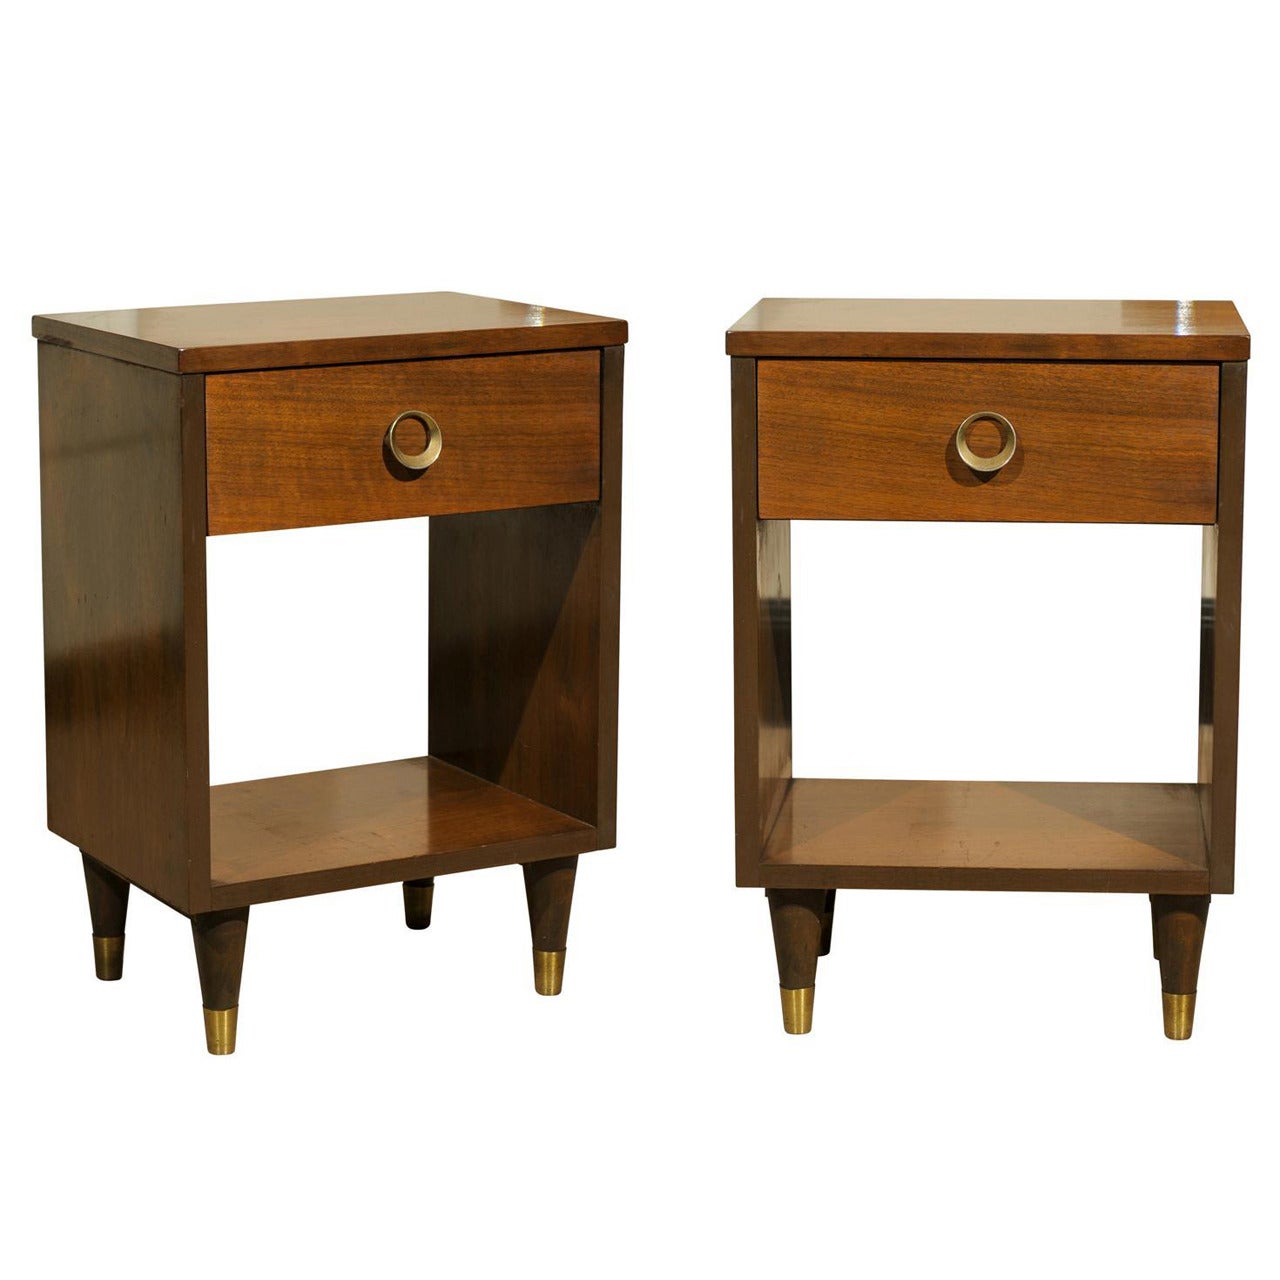 Stylish Modern End Tables/Night Stands in Walnut